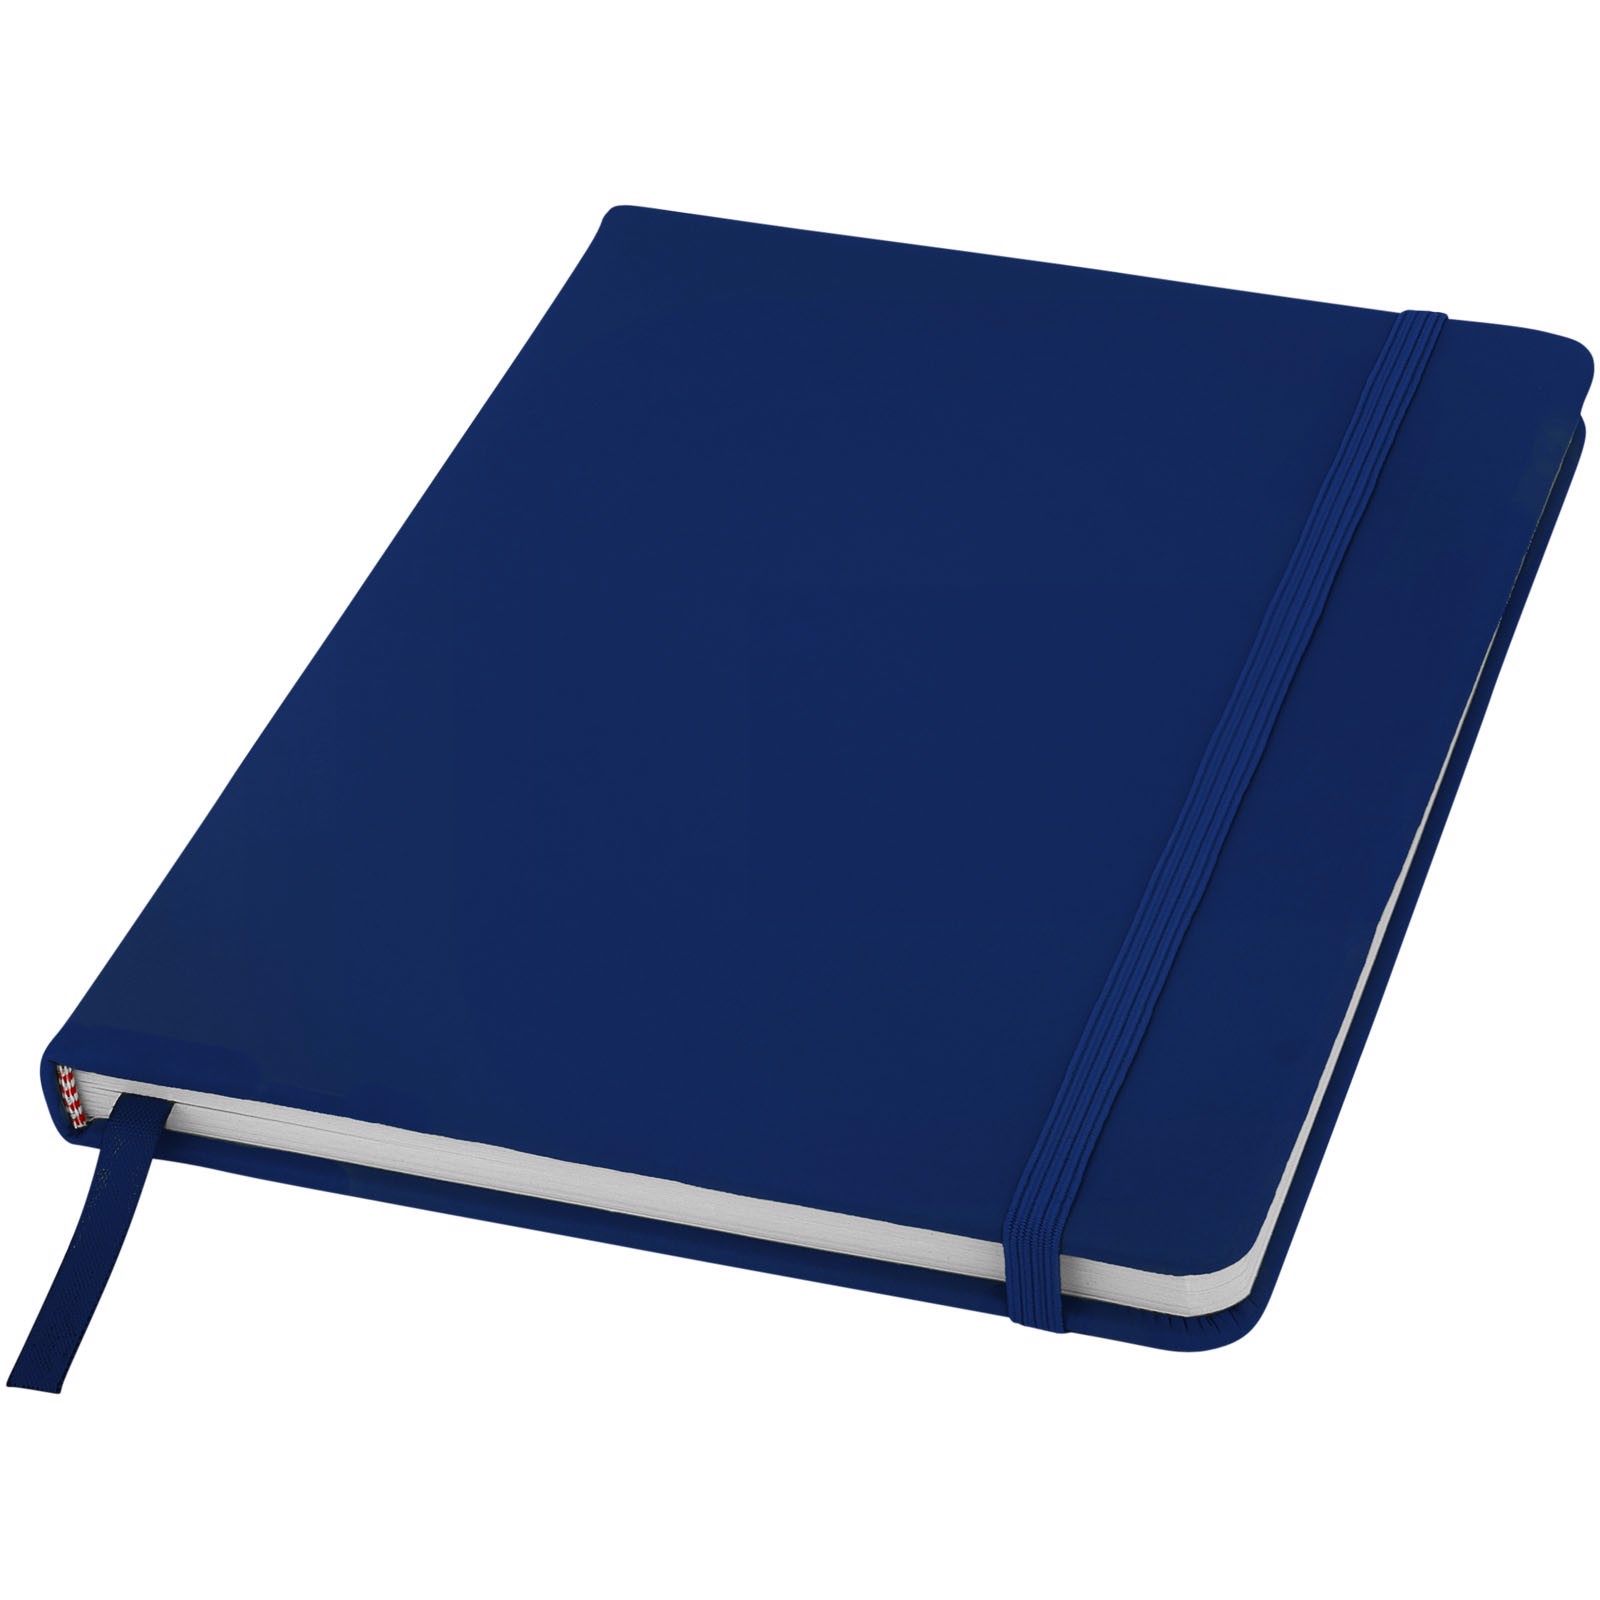 Spectrum A5 notebook with blank pages - Navy